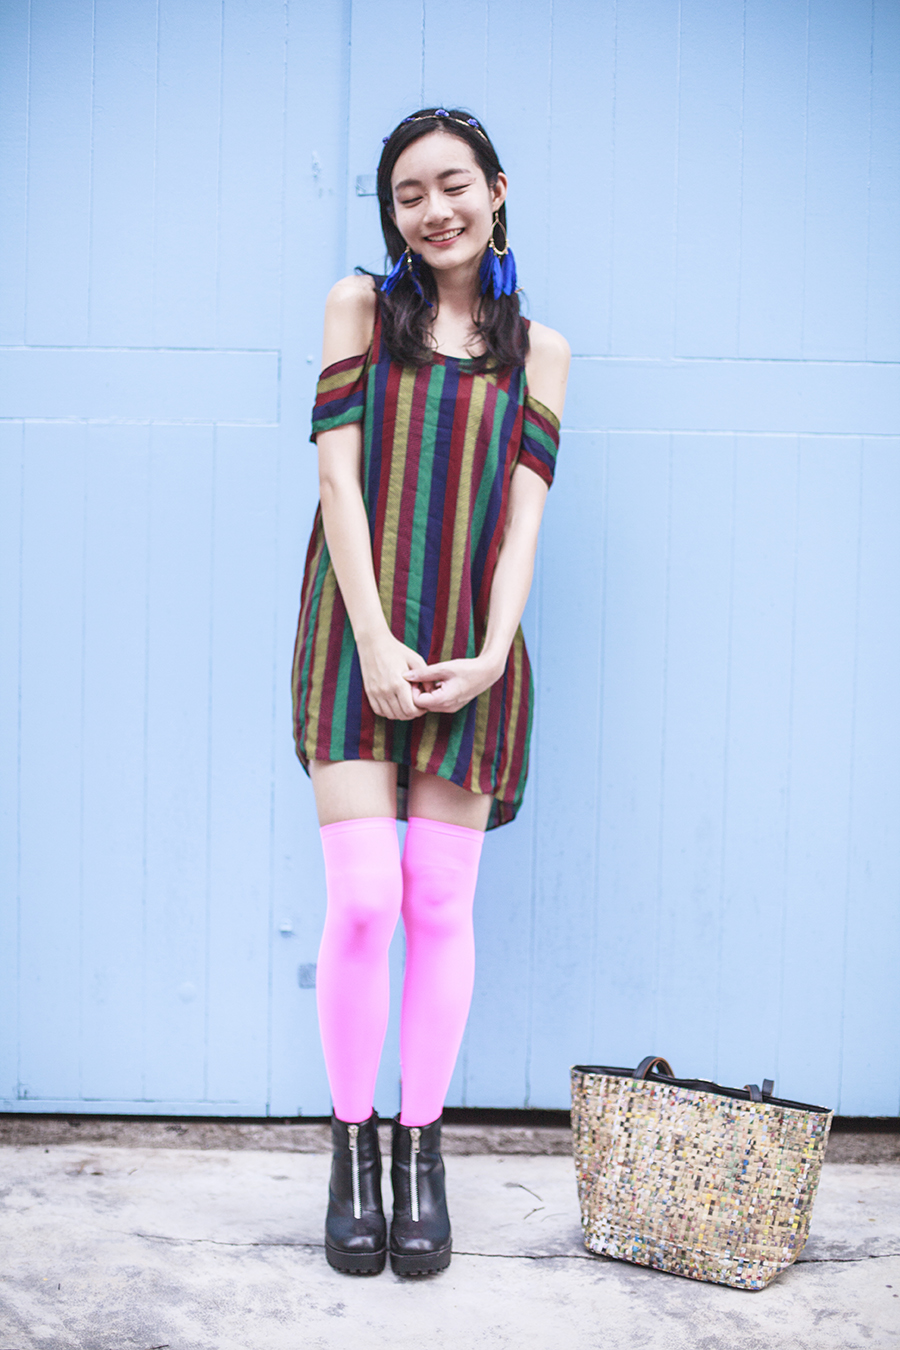 Bohemian Rhapsody Outfit: Urban Outfitters striped off-shoulder dress, We Love Colors neon pink thigh high stockings, Rubi black platform zipper boots, paper floral headband from Bangkok, H&M blue feather hoop earrings, manga strips tote bag from Hong Kong.